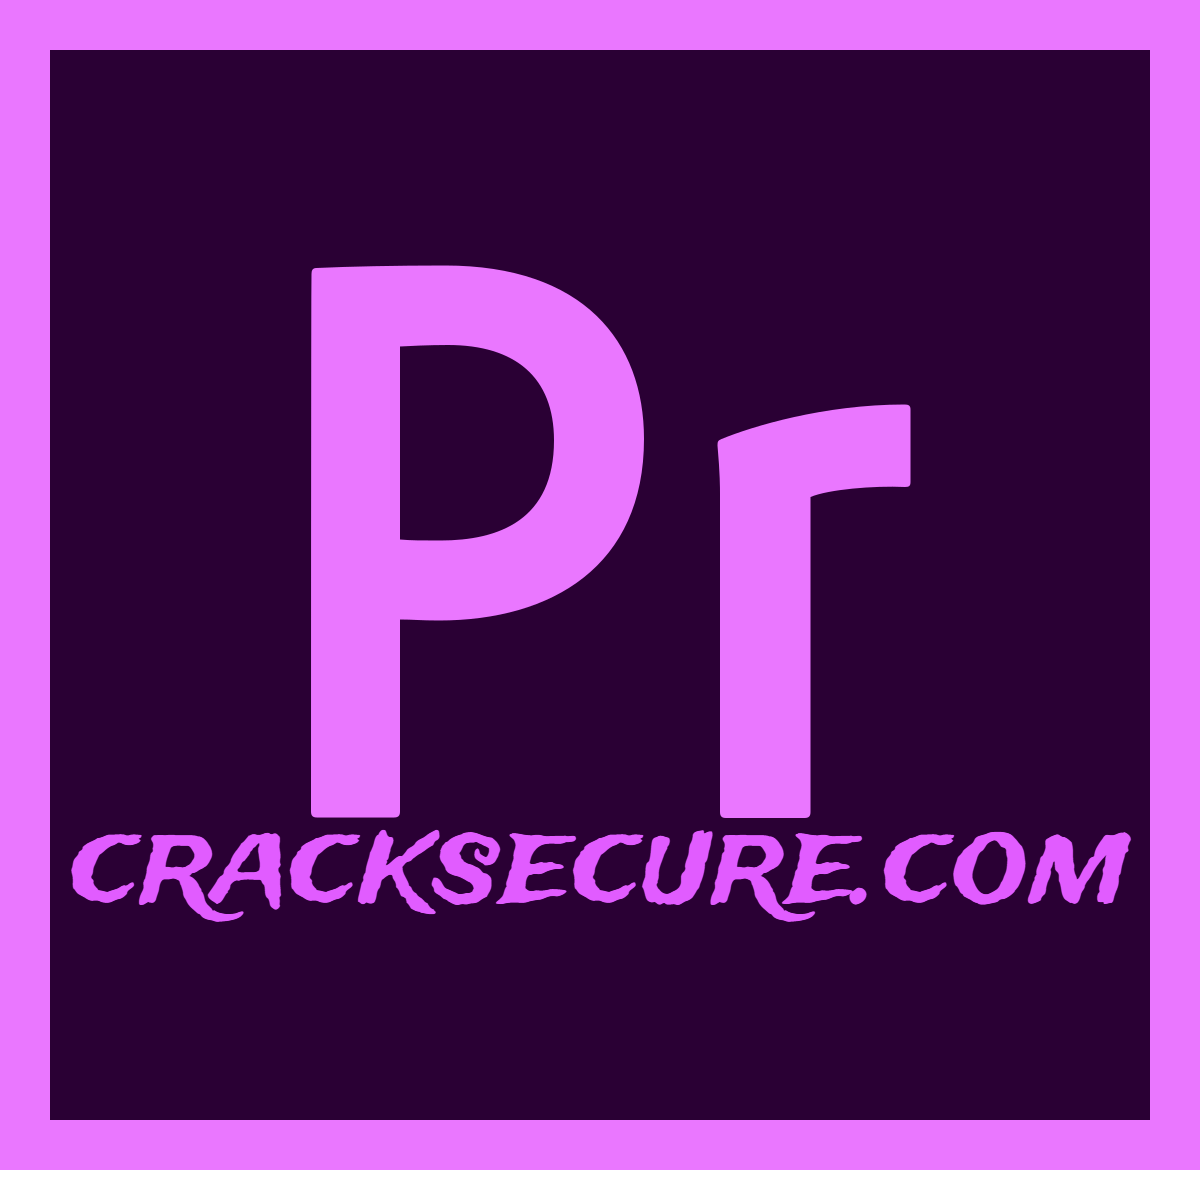 Adobe Premiere Pro CC Crack 2022 22.6.2.2 With Serial Key Download